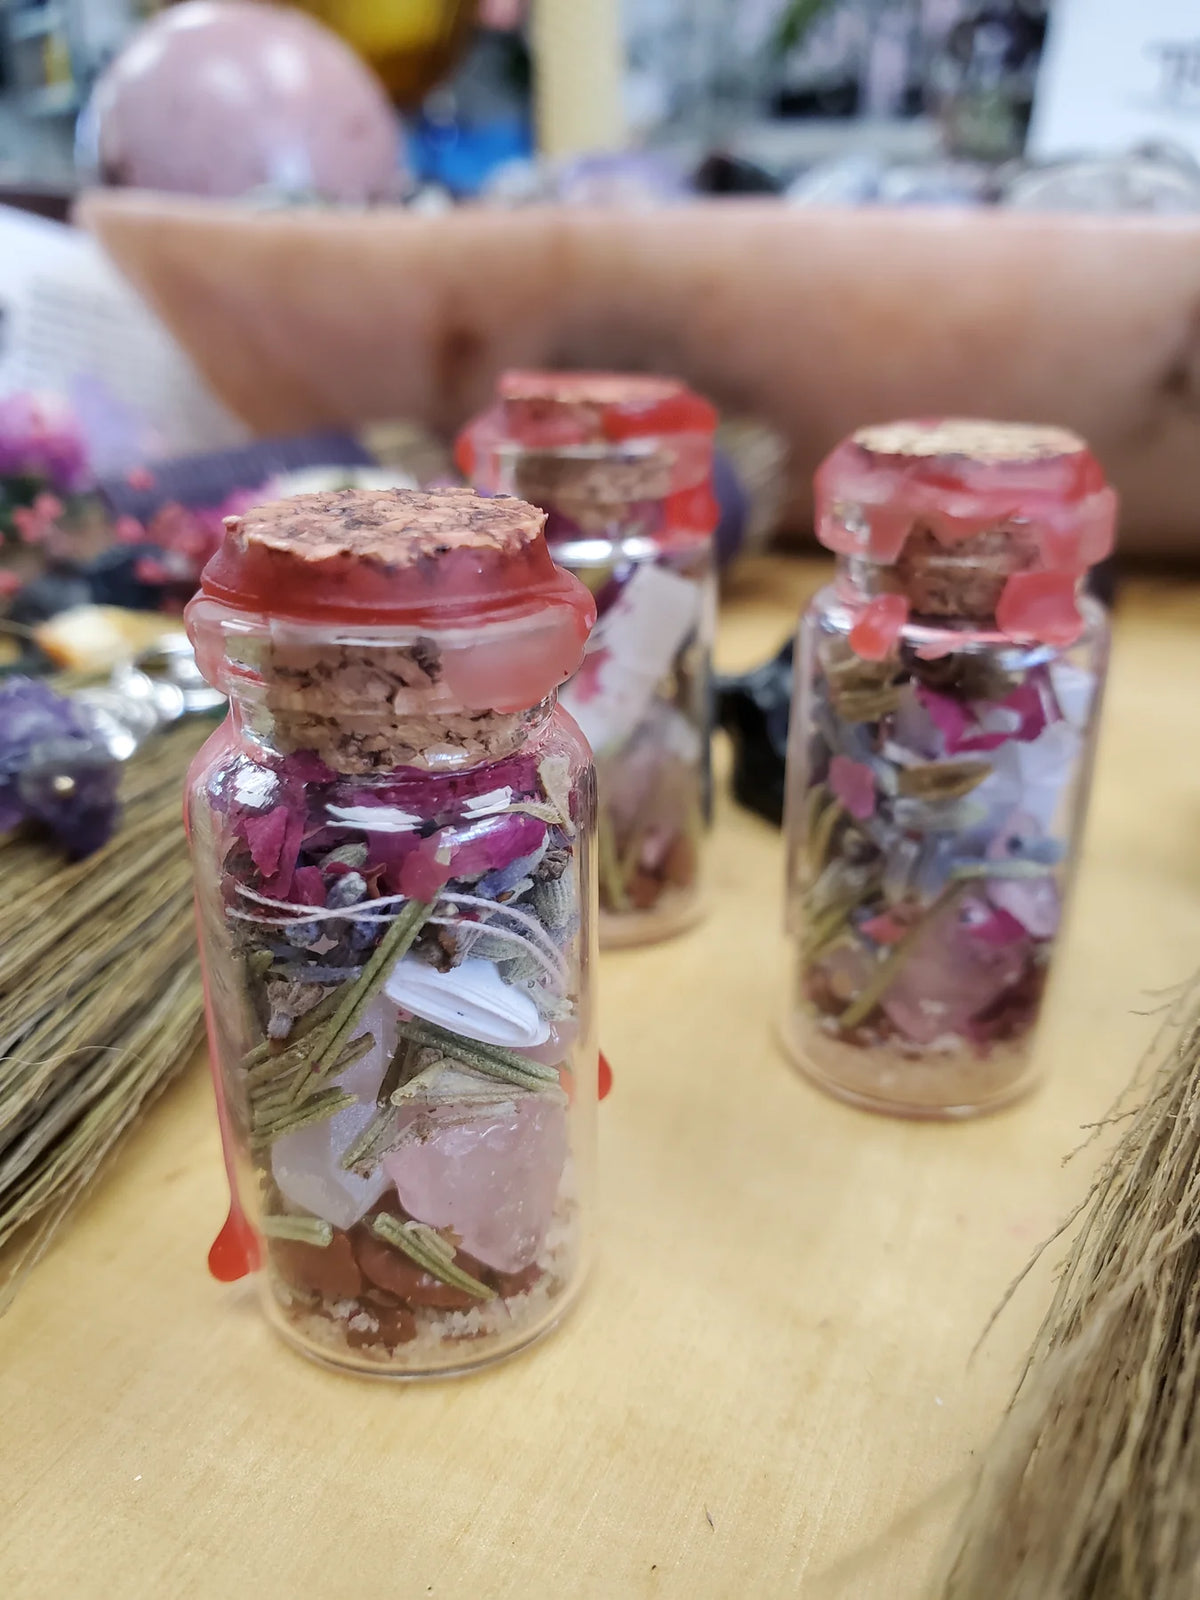 Witch's Way Self Love Spell Jar